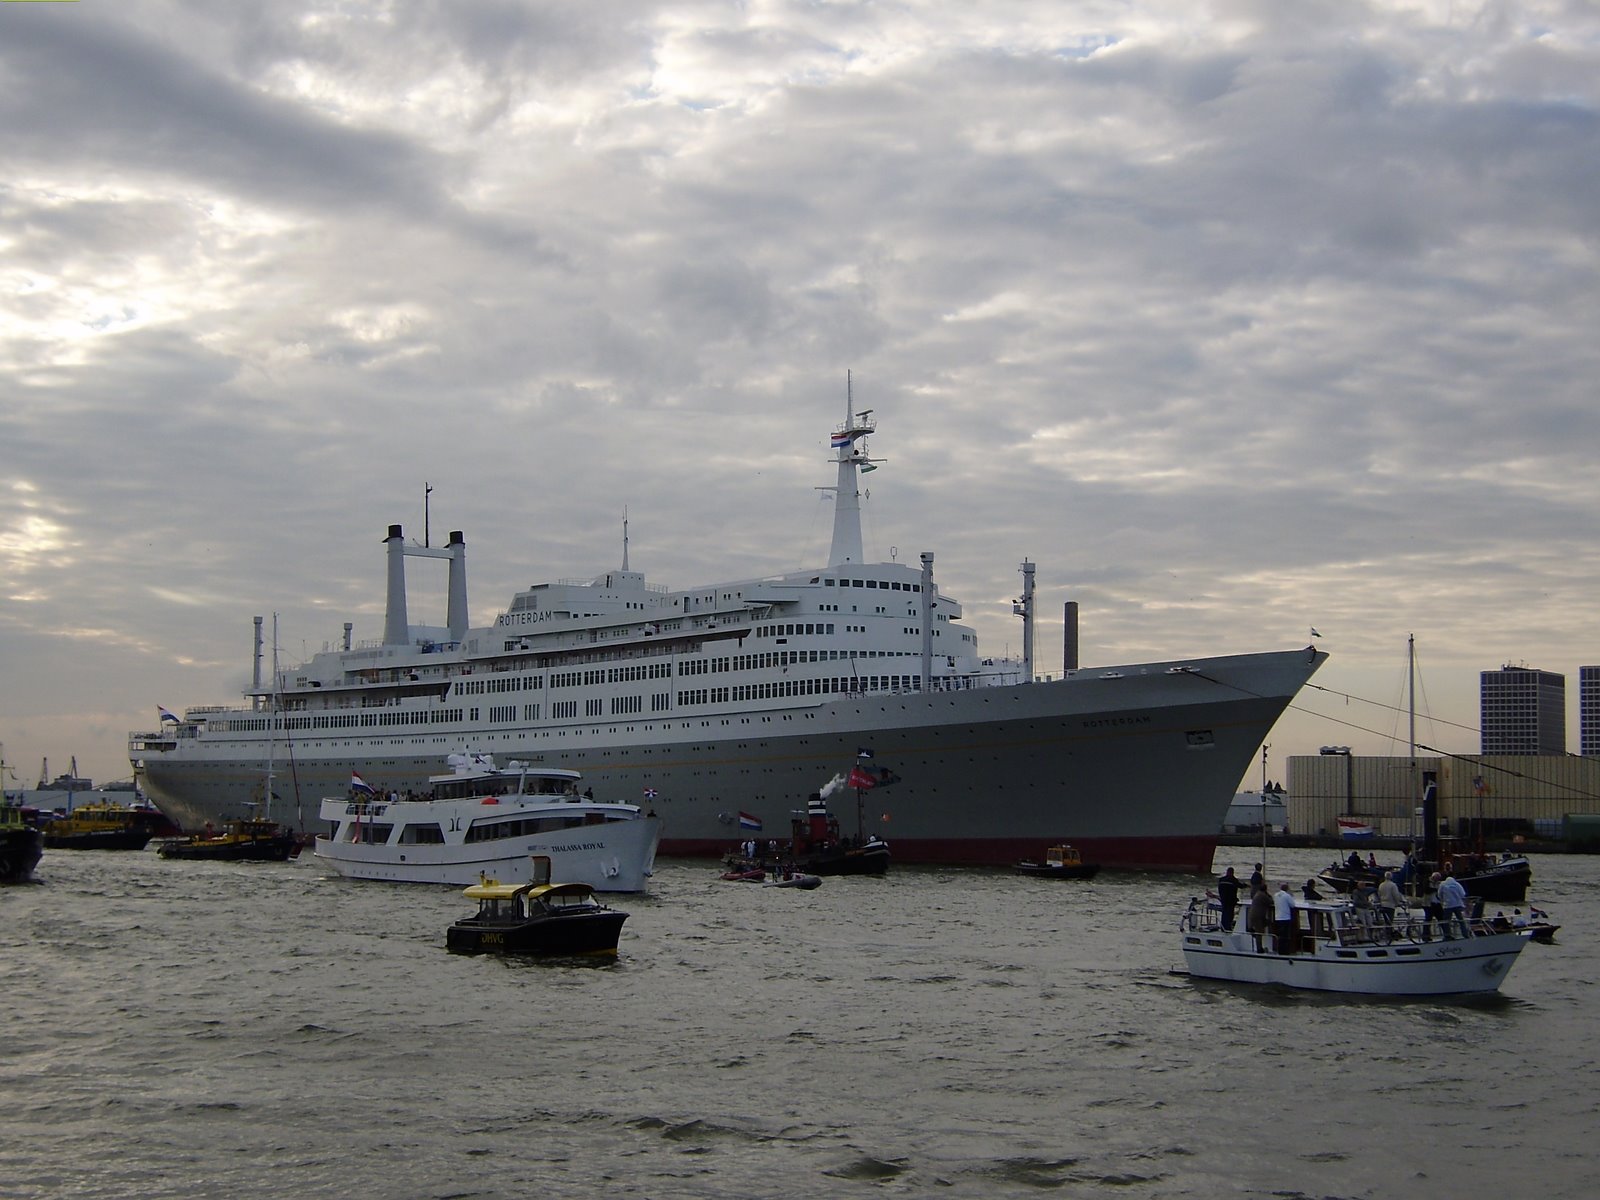 The SS Rotterdam seen arriving in Rotterdam